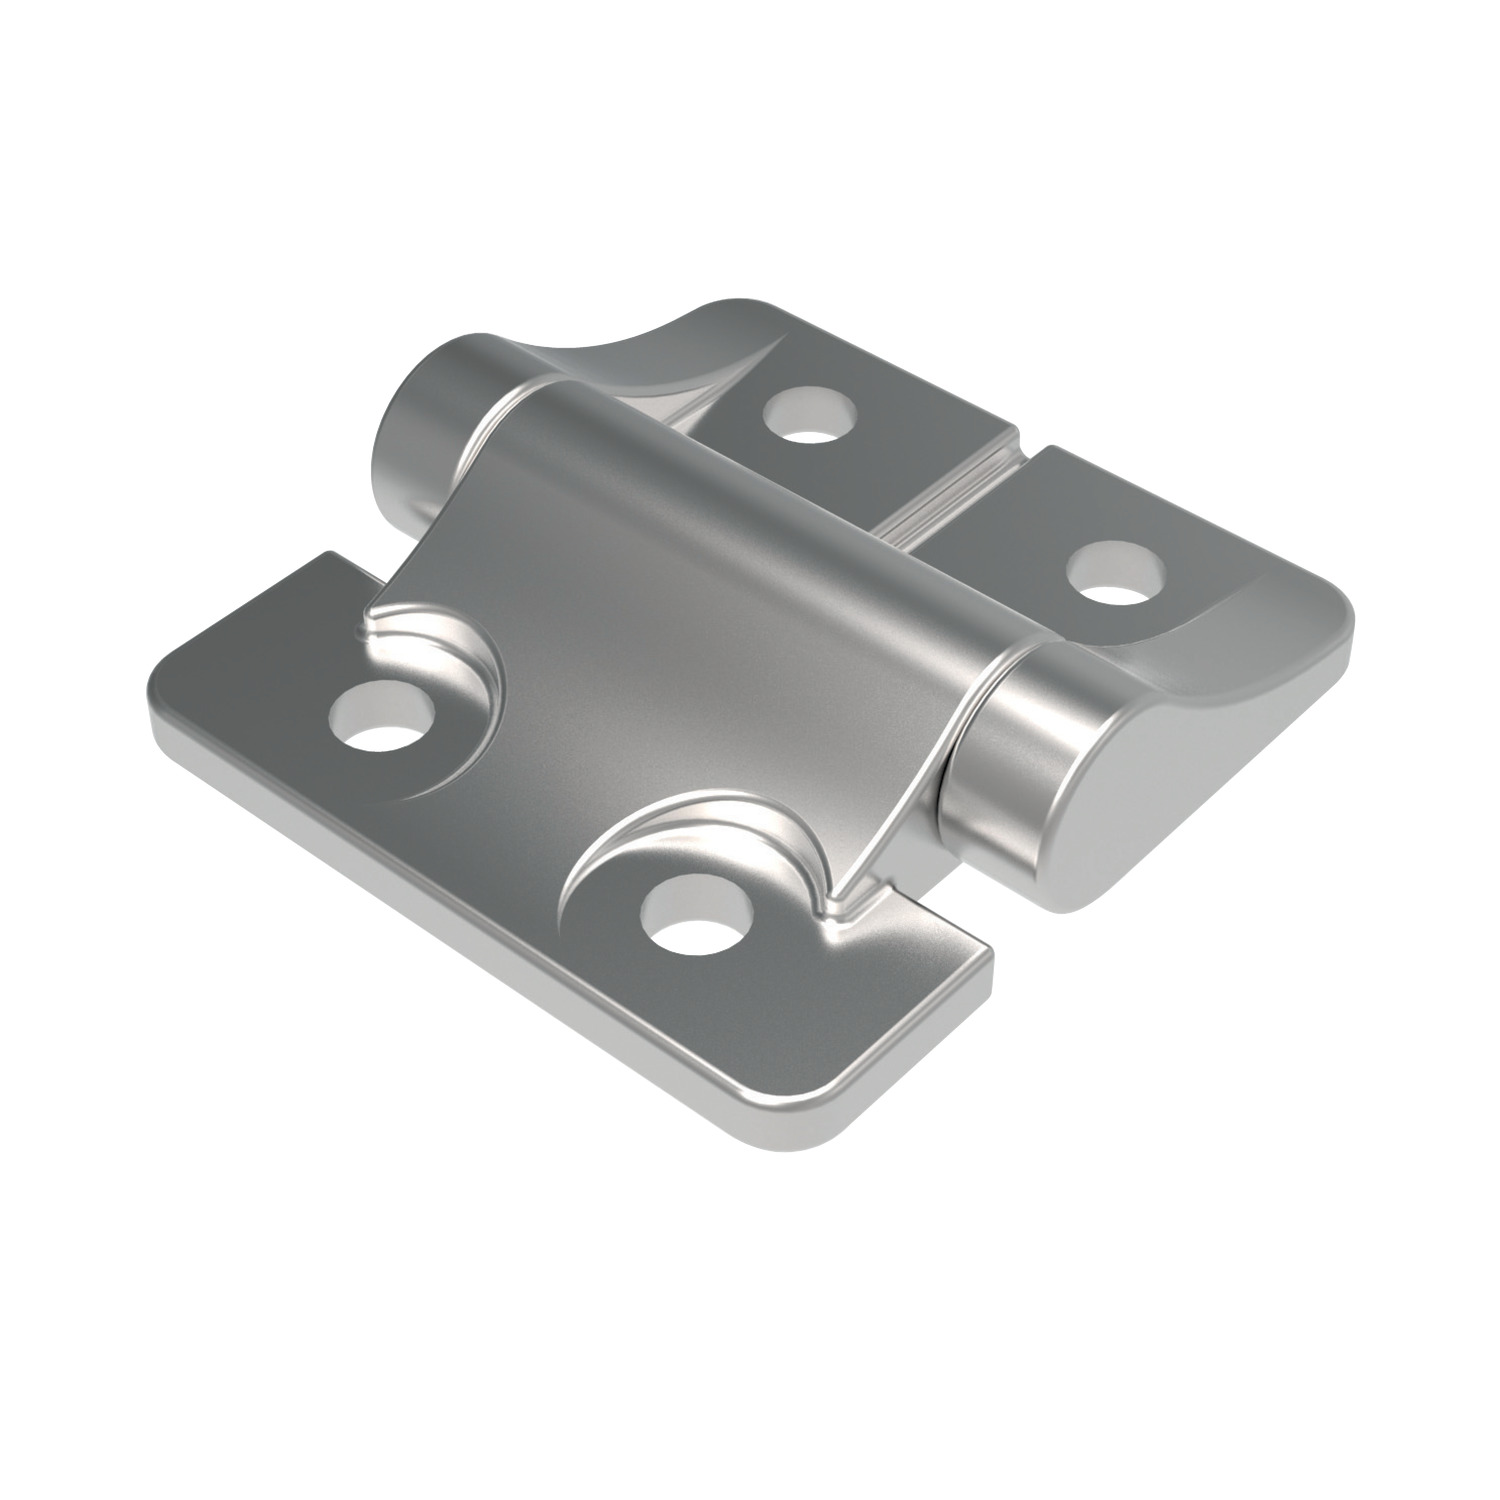 Friction Hinges - Natural - Symmetric Counter and plain bore friction hinges with a torque of 0,0 - 3,5 Nm.